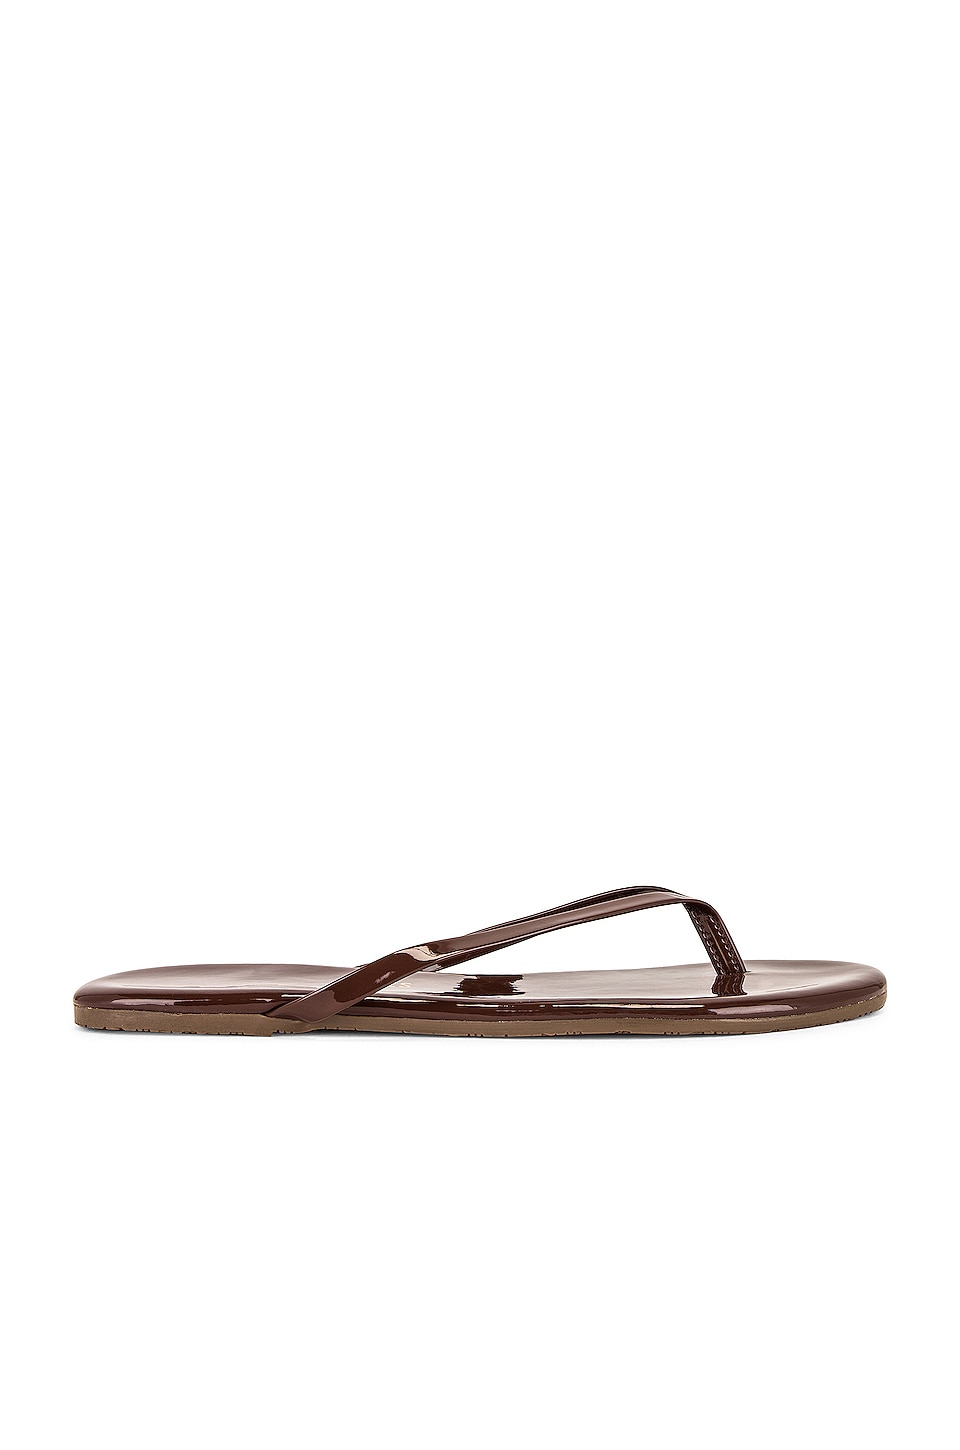 TKEES Foundations Gloss Flip Flop in Cappuccino REVOLVE